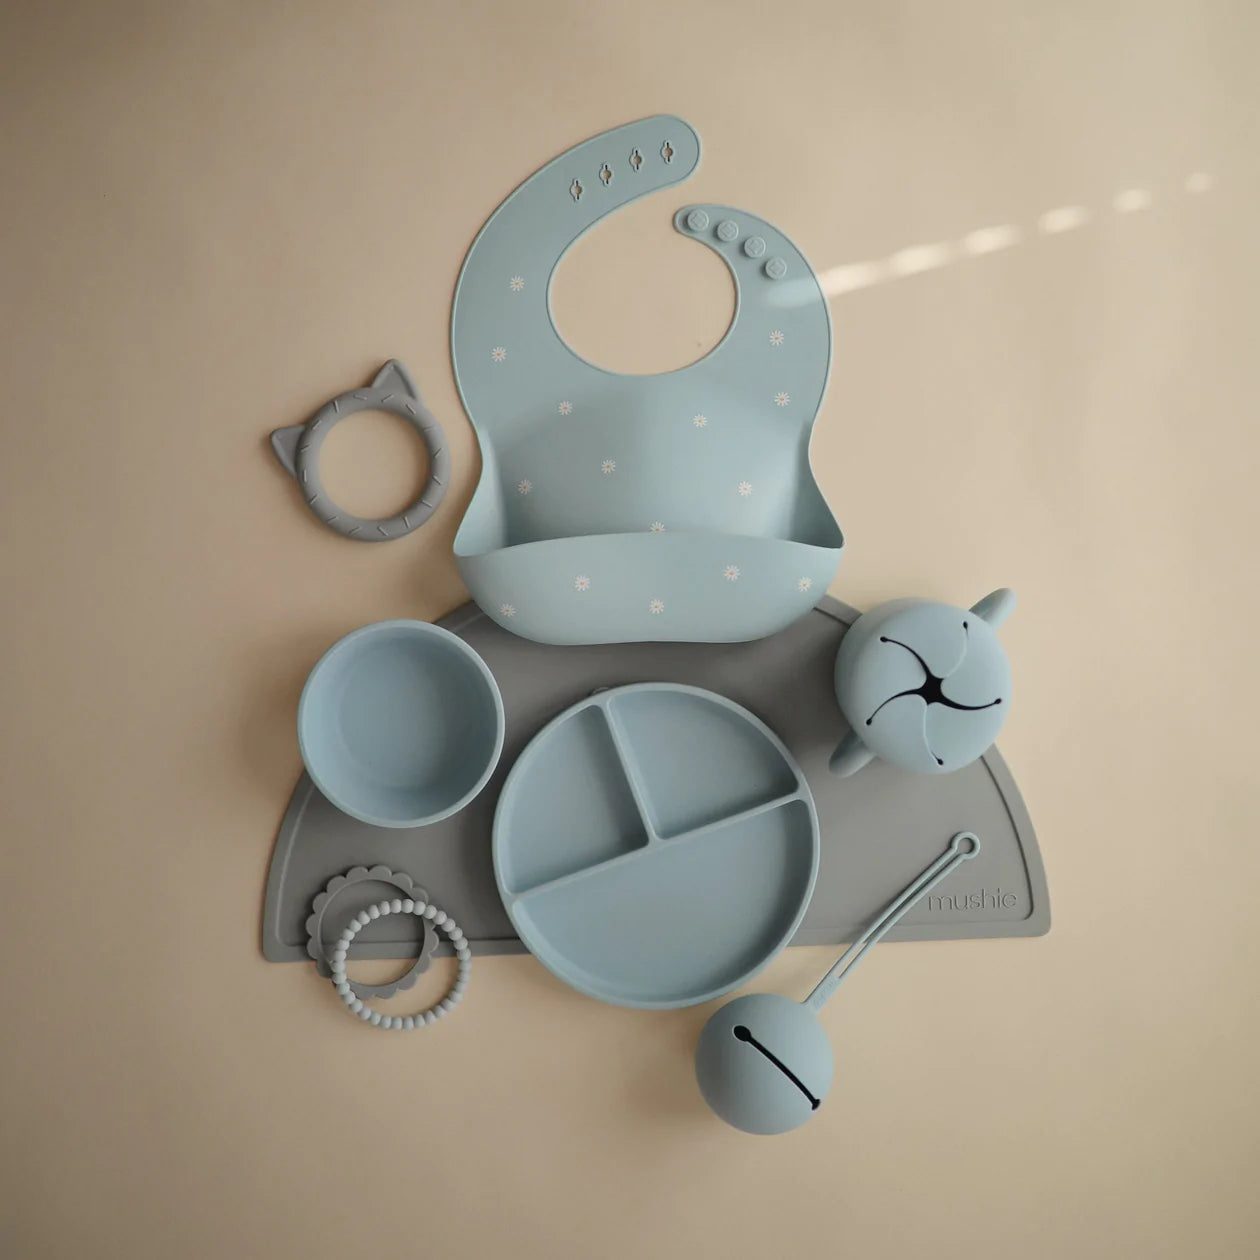 Silicone Pacifier Holder Case 矽膠奶嘴盒 (Powder Blue)